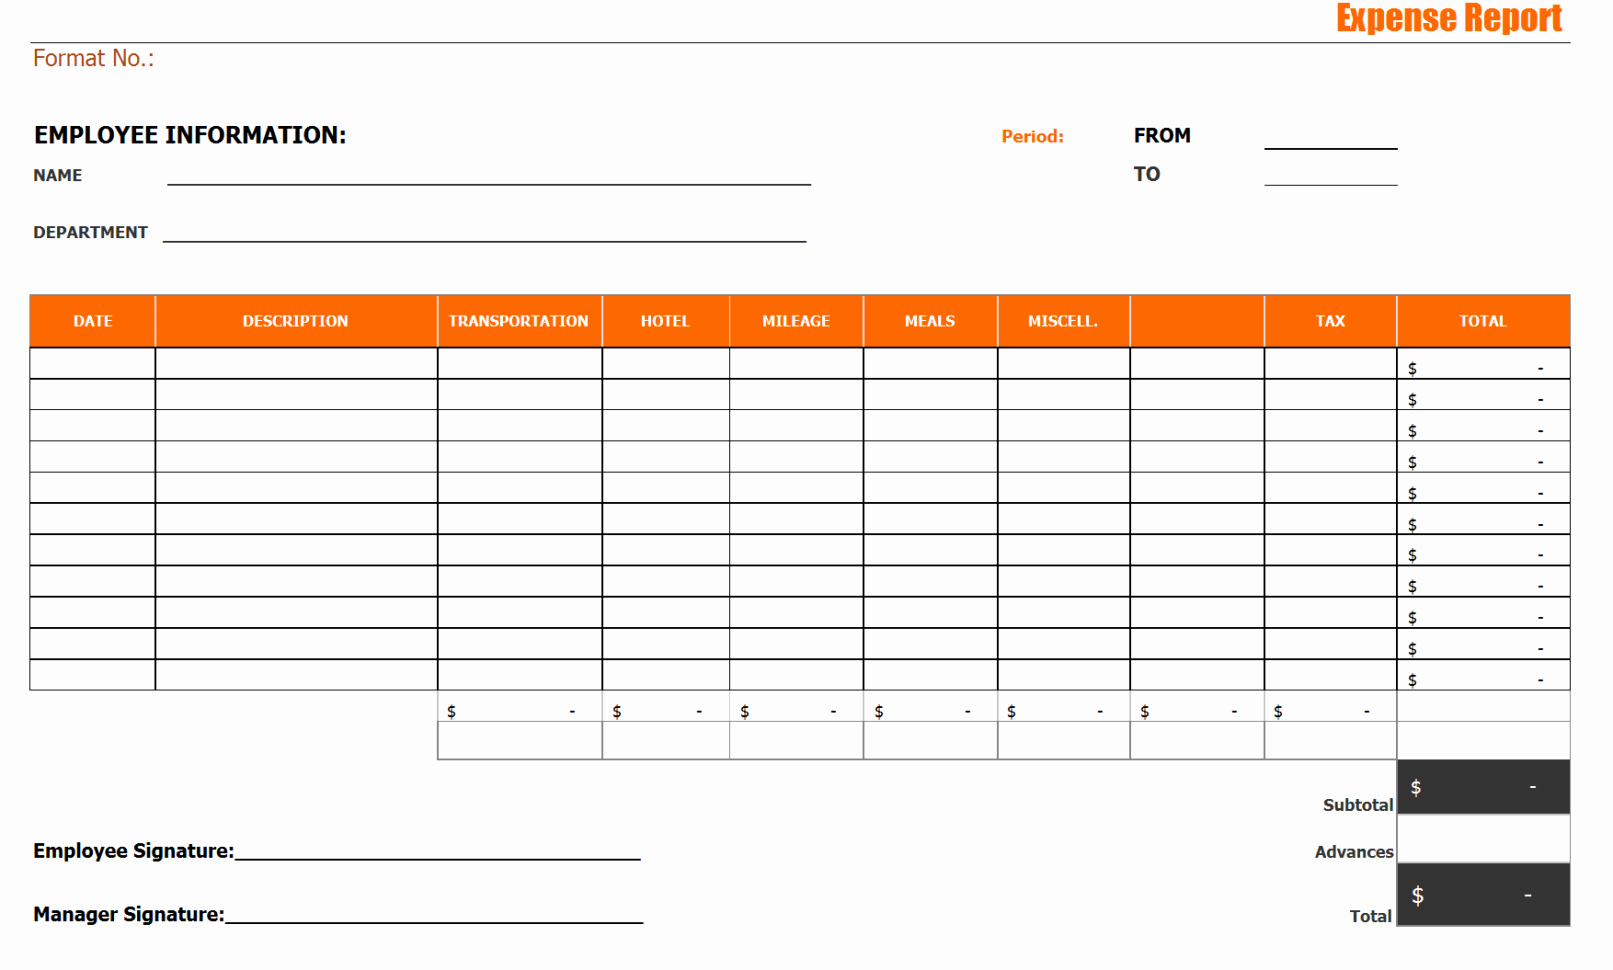 Free Excel Expense Report Template Lovely Fice Expense Report Spreadsheet Templates for Busines